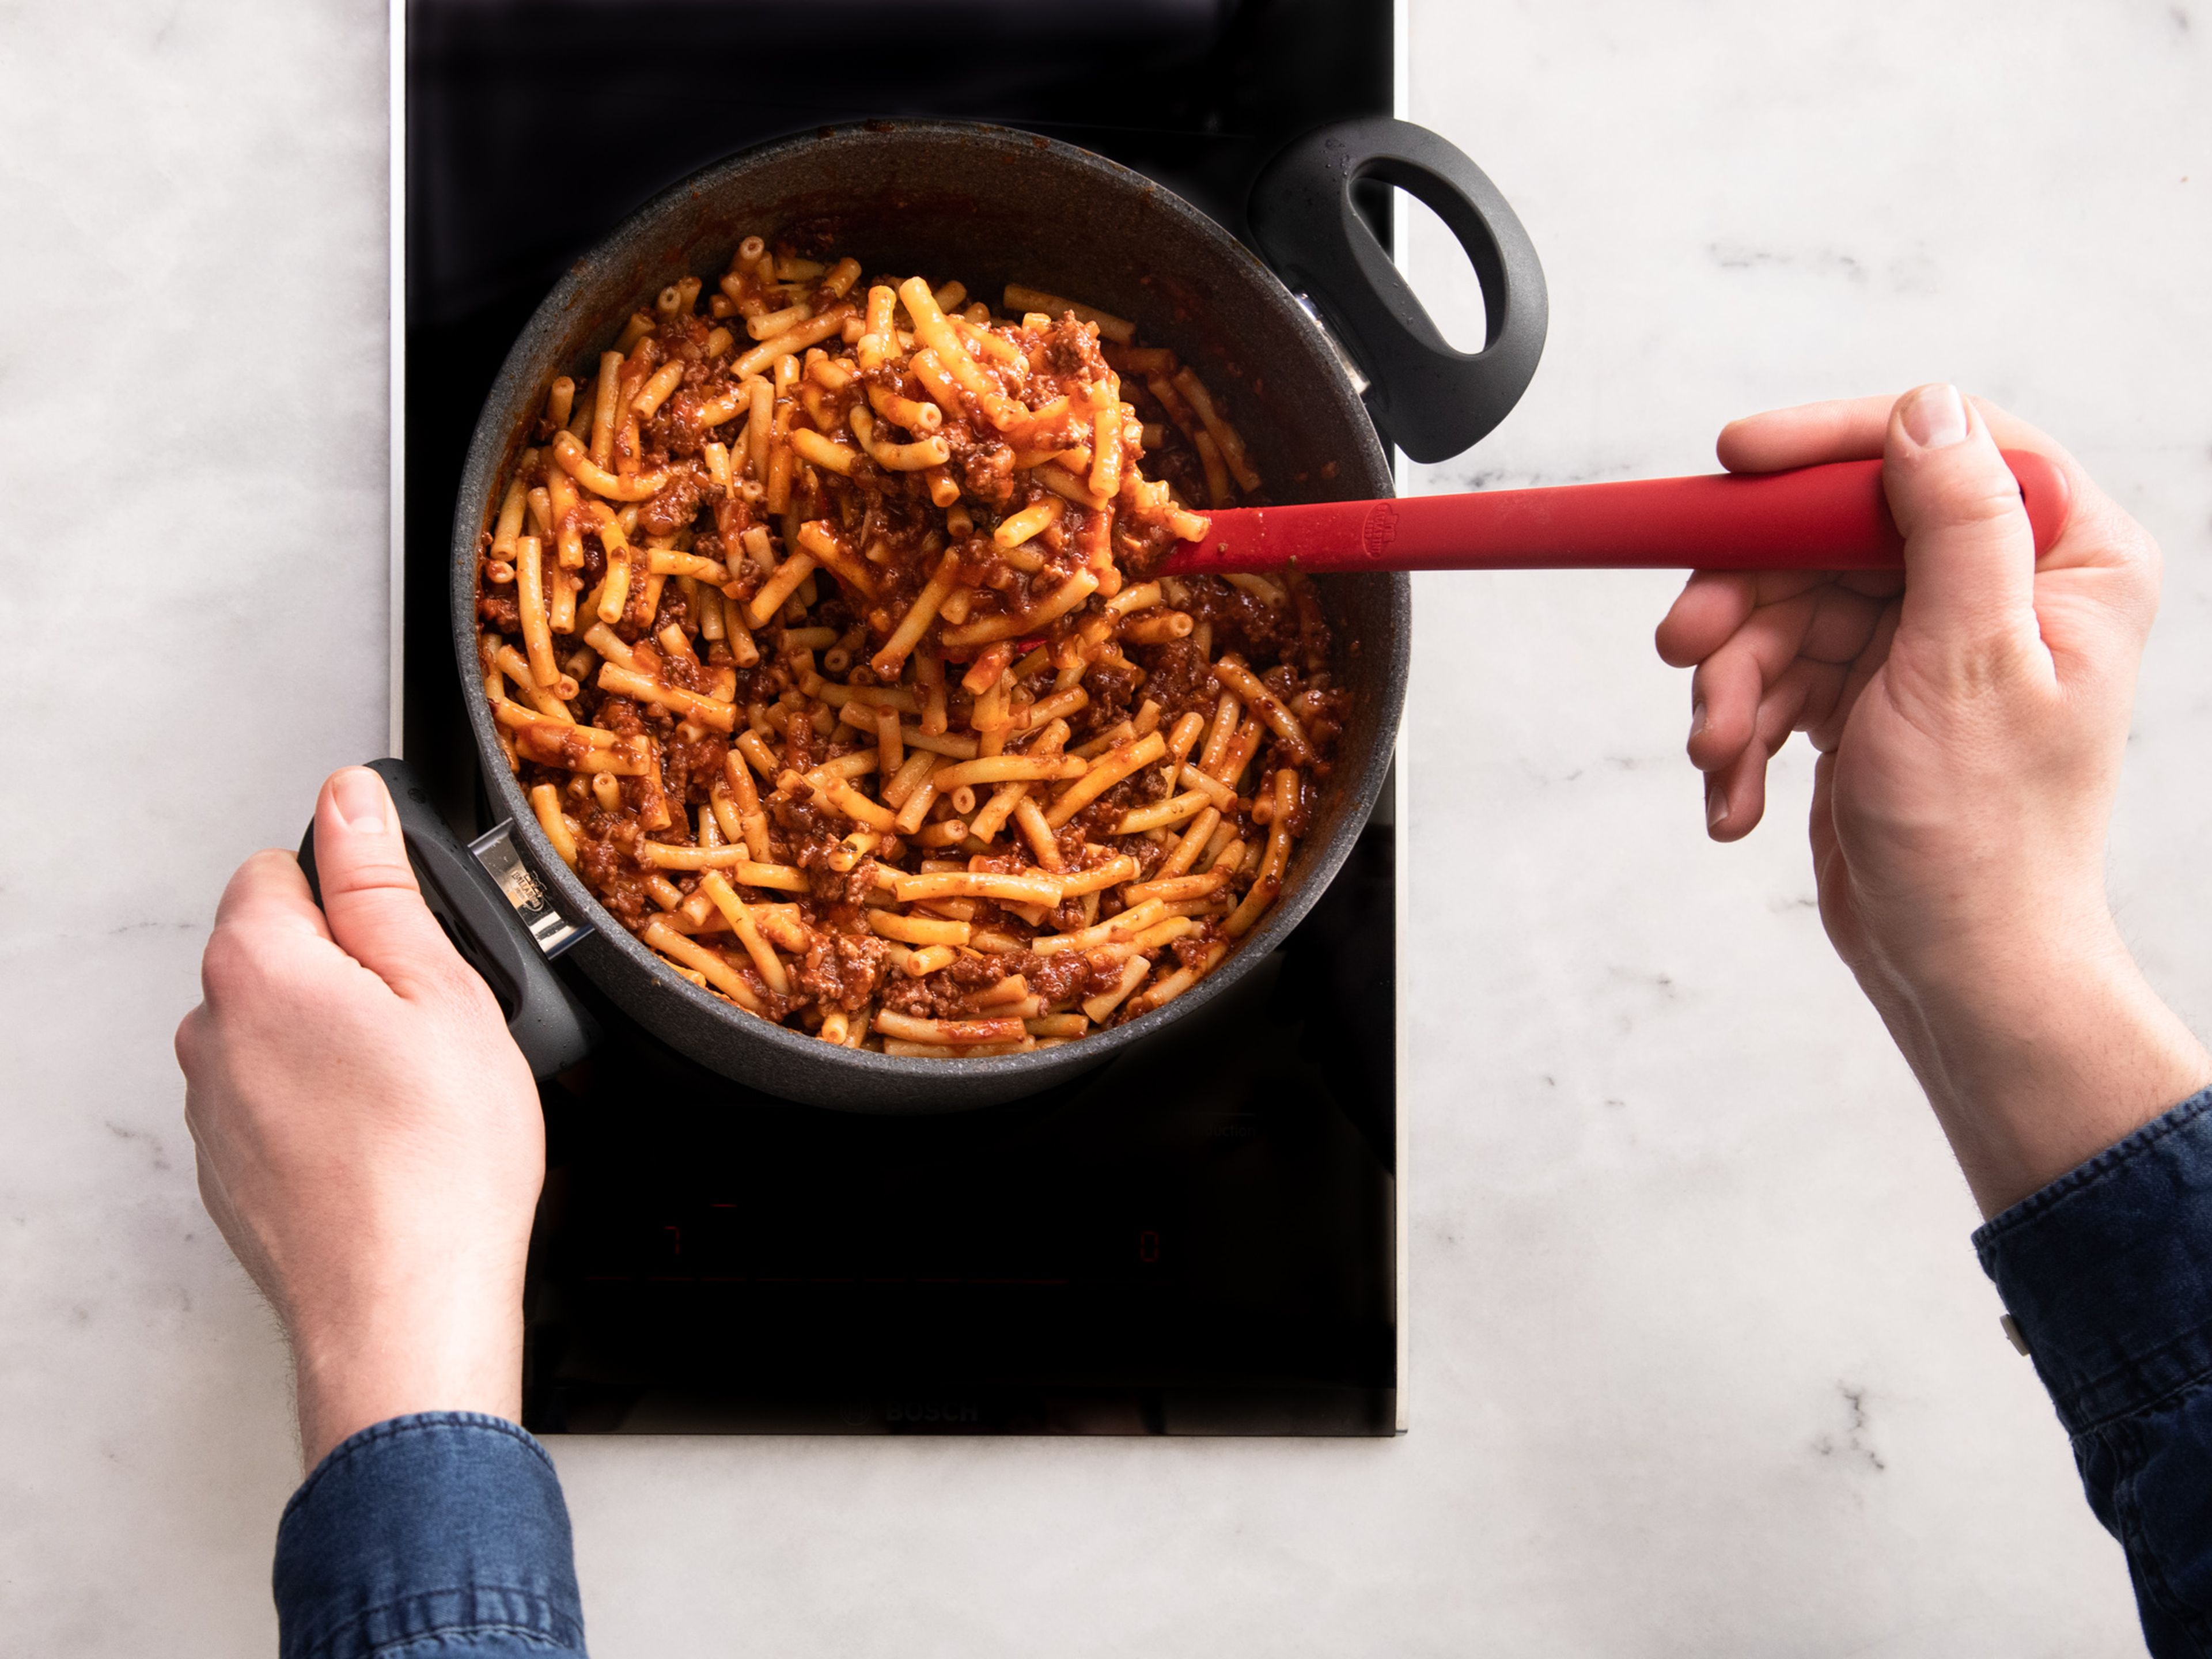 When the bolognese is almost ready, boil the macaroni in plenty of salted
water until al dente or according to the package instructions. Drain and add to the bolognese. Toss to combine then serve with shredded Parmesan cheese. Enjoy!